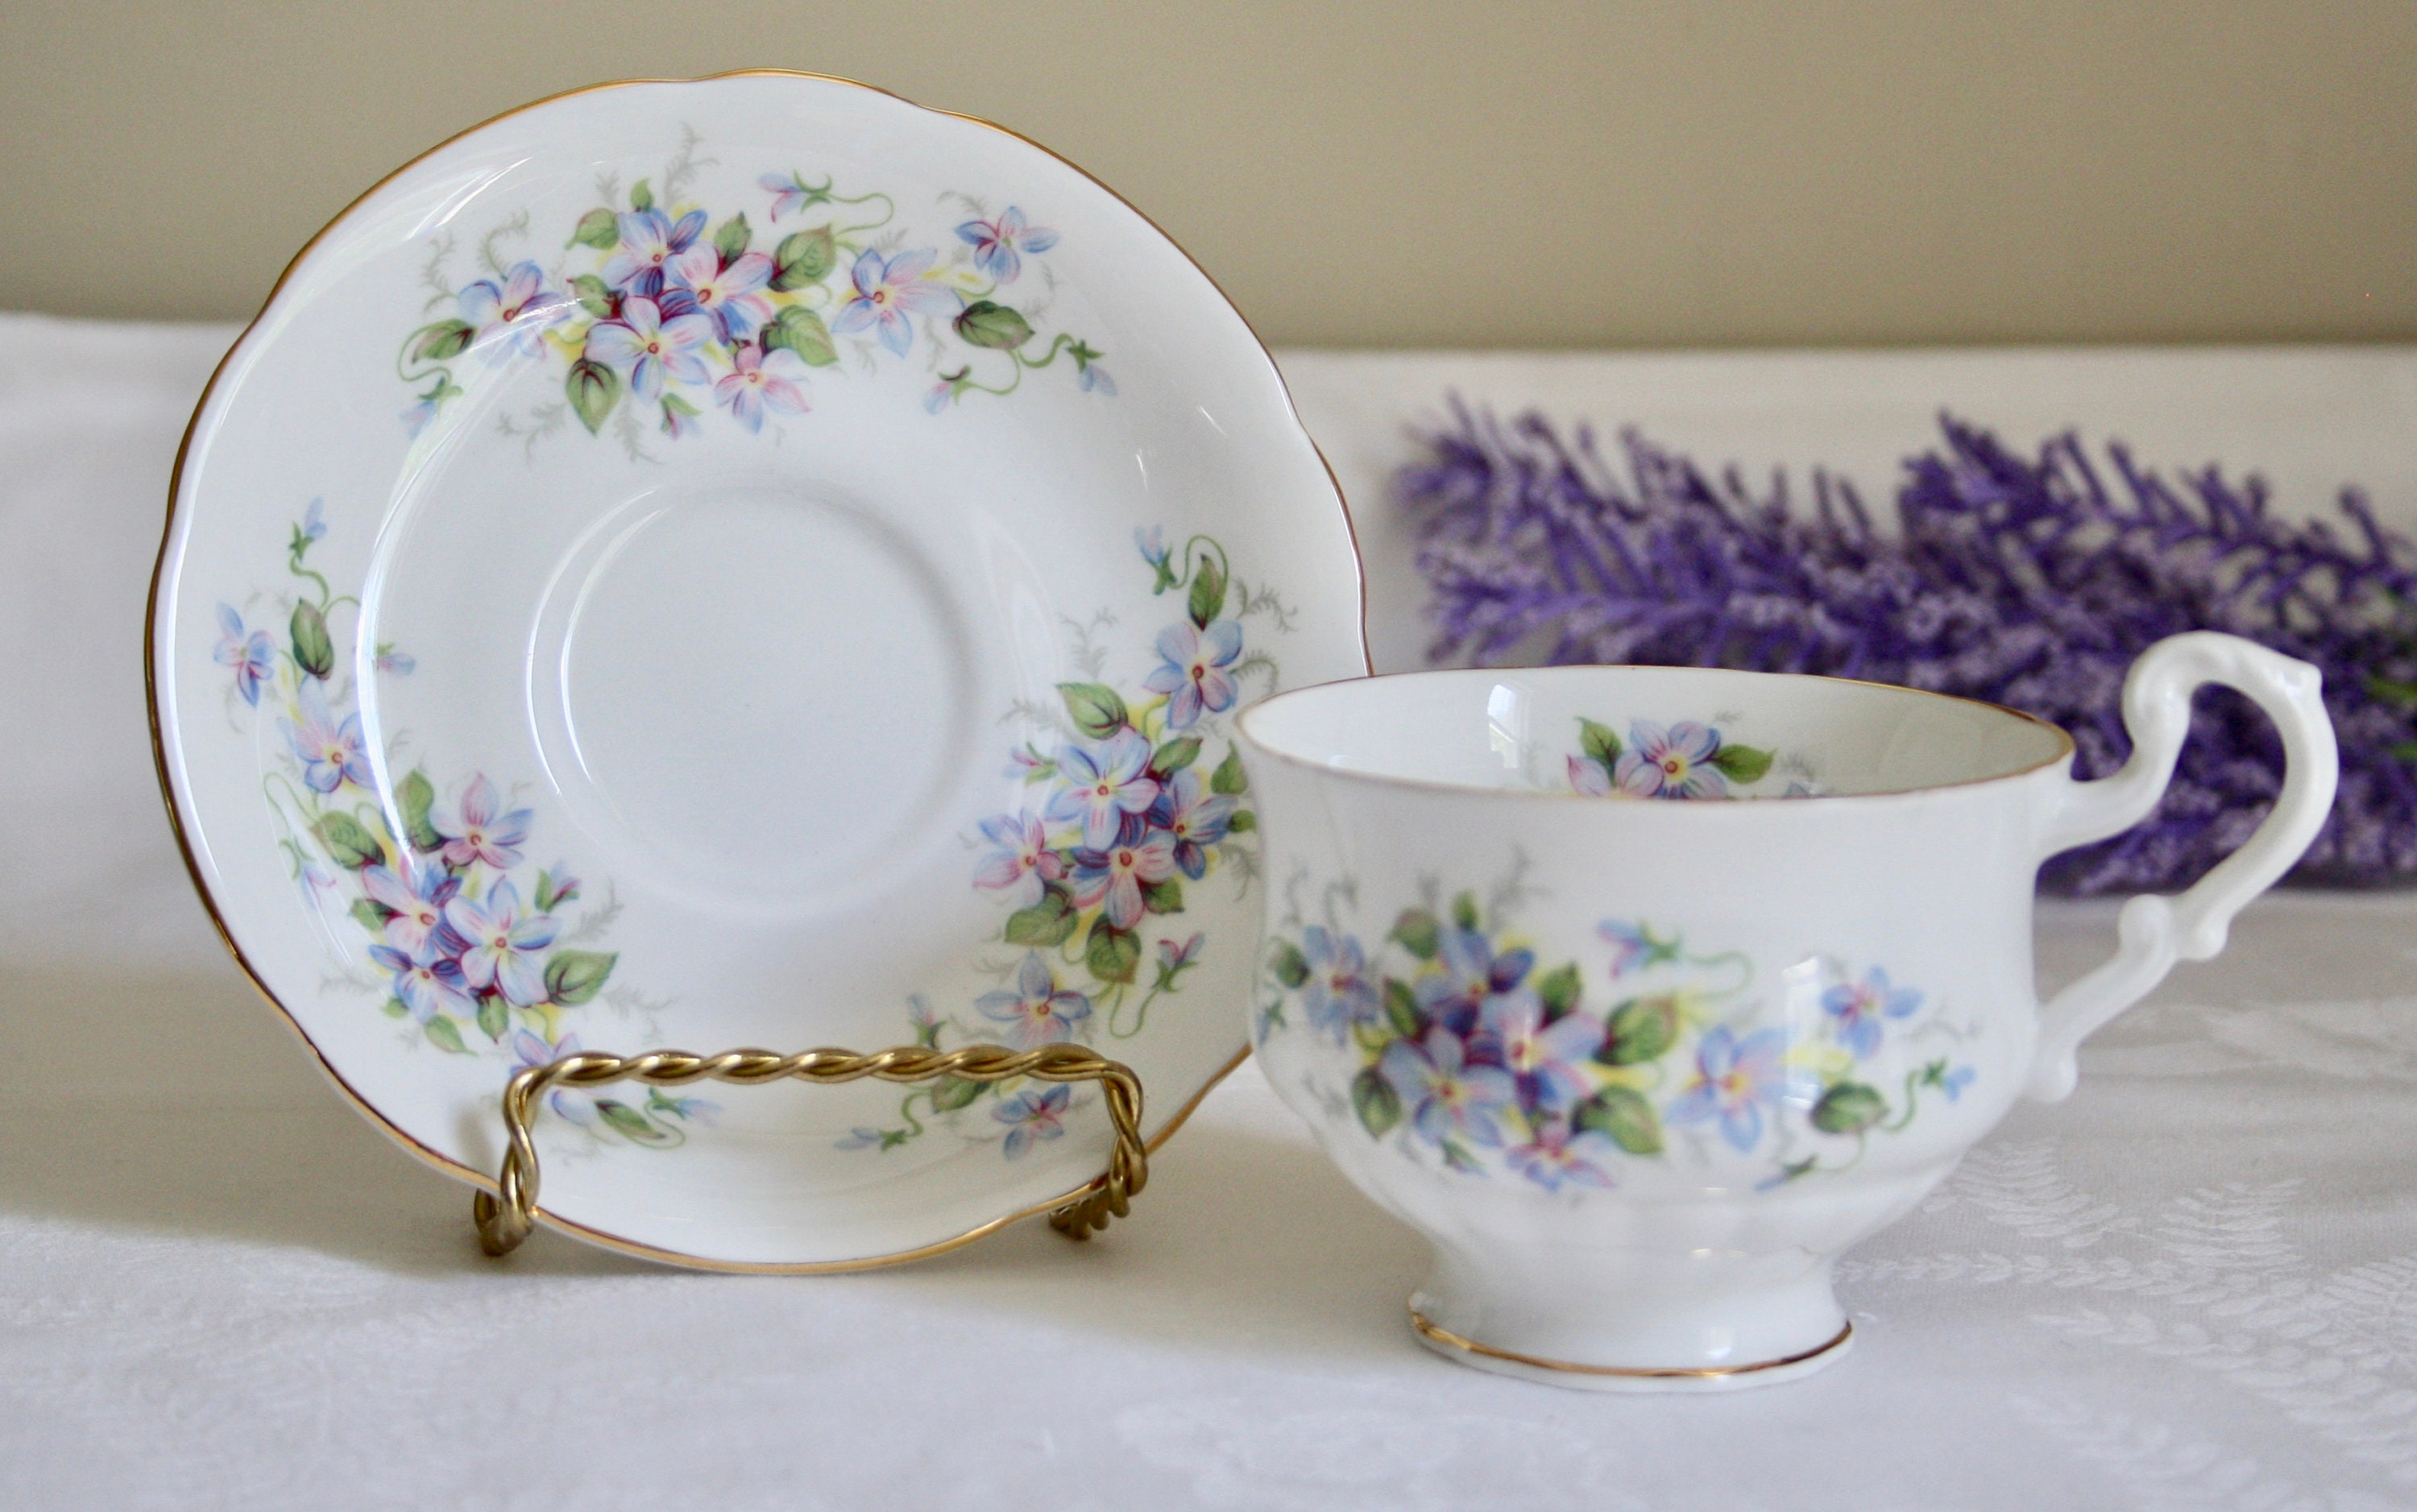 Paragon English Violets Tea Cup and Saucer Bone China Floral | Etsy